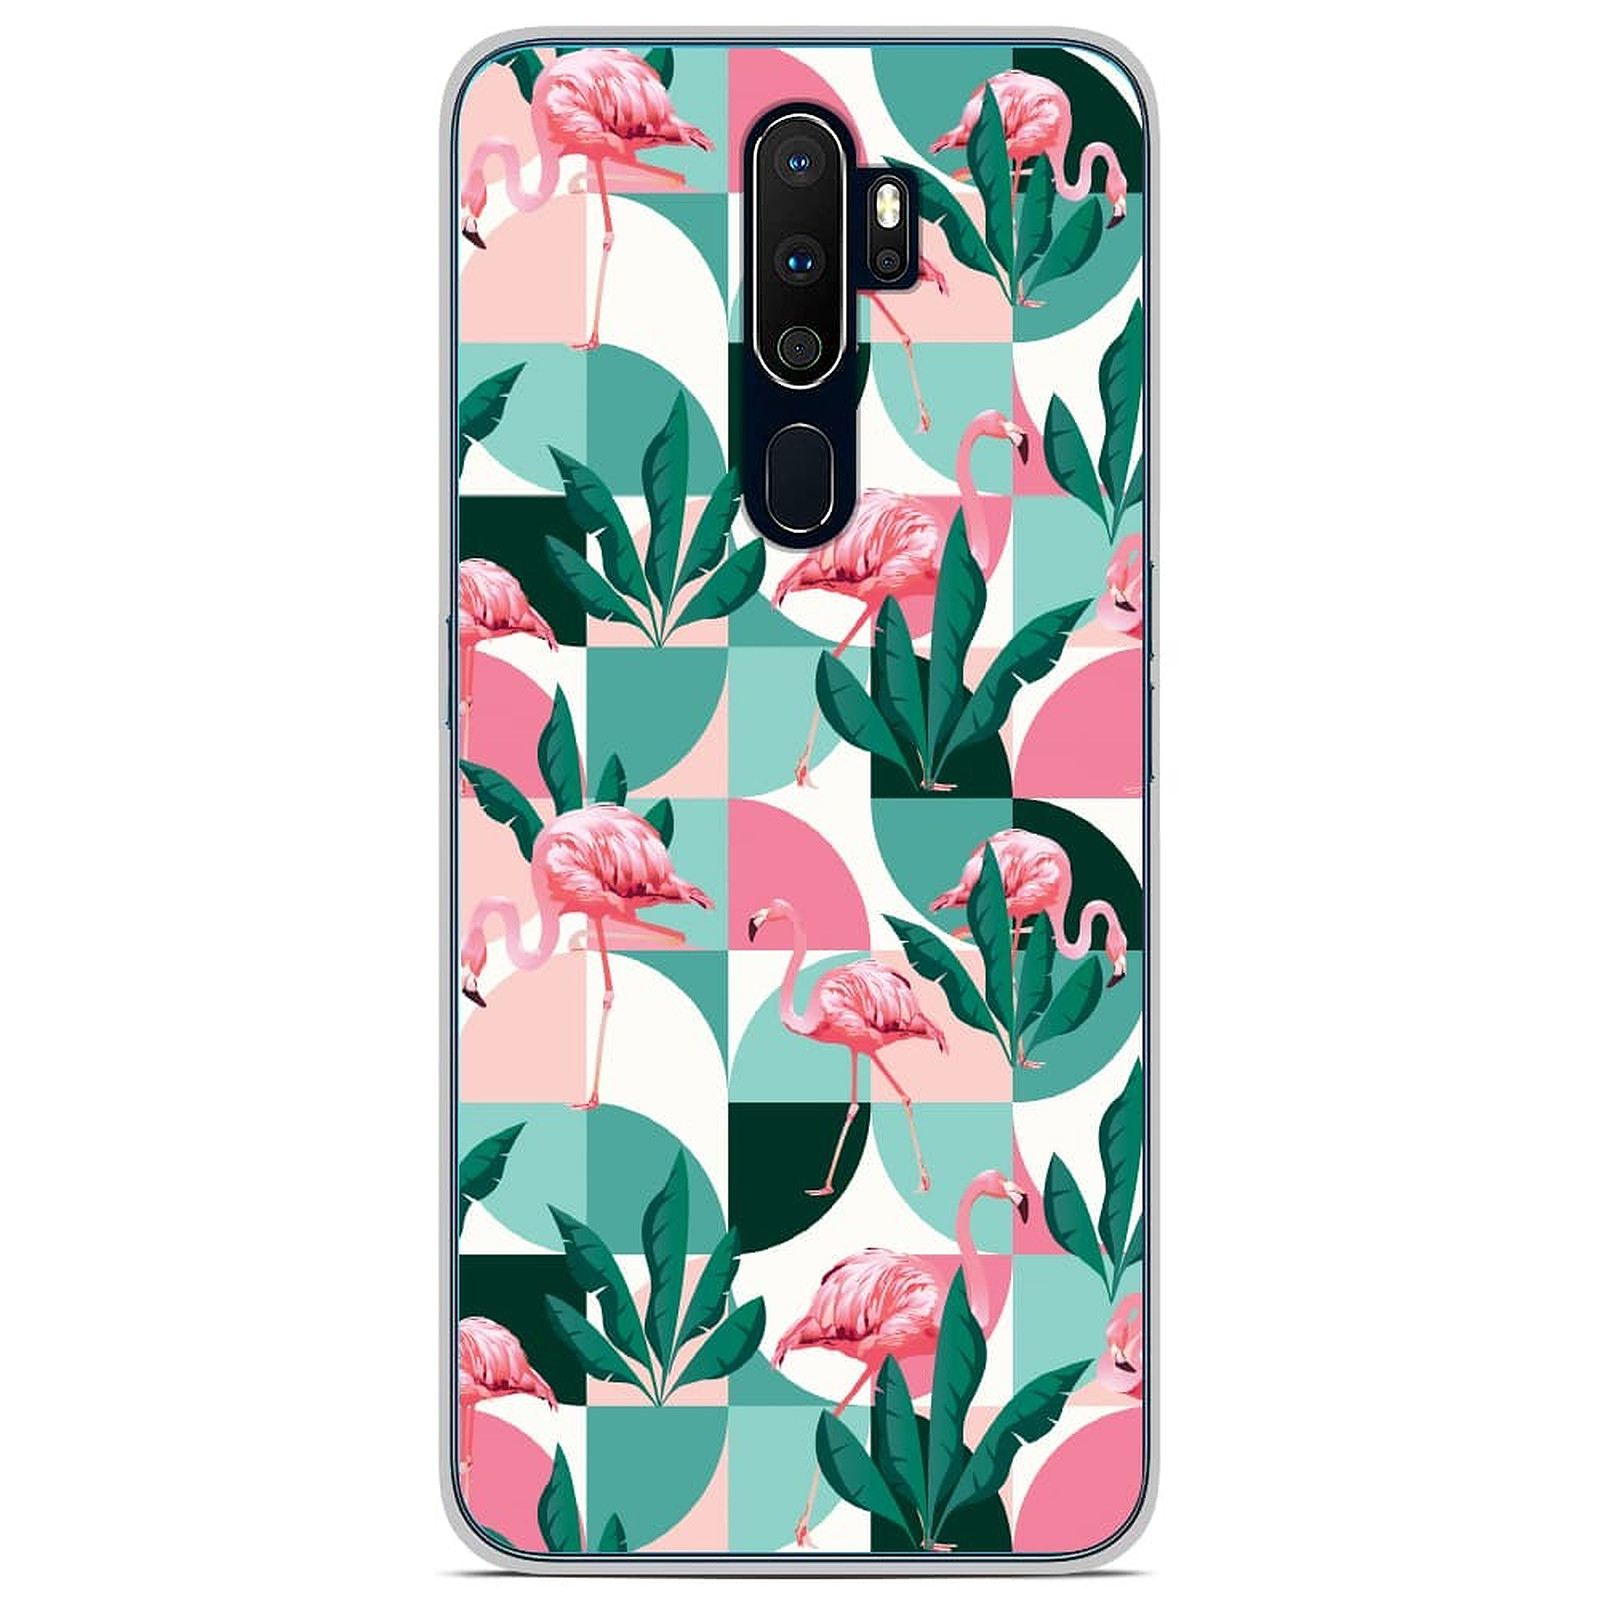 1001 Coques Coque silicone gel Oppo A5 2020 motif Flamants Roses ge´ome´trique - Coque telephone 1001Coques